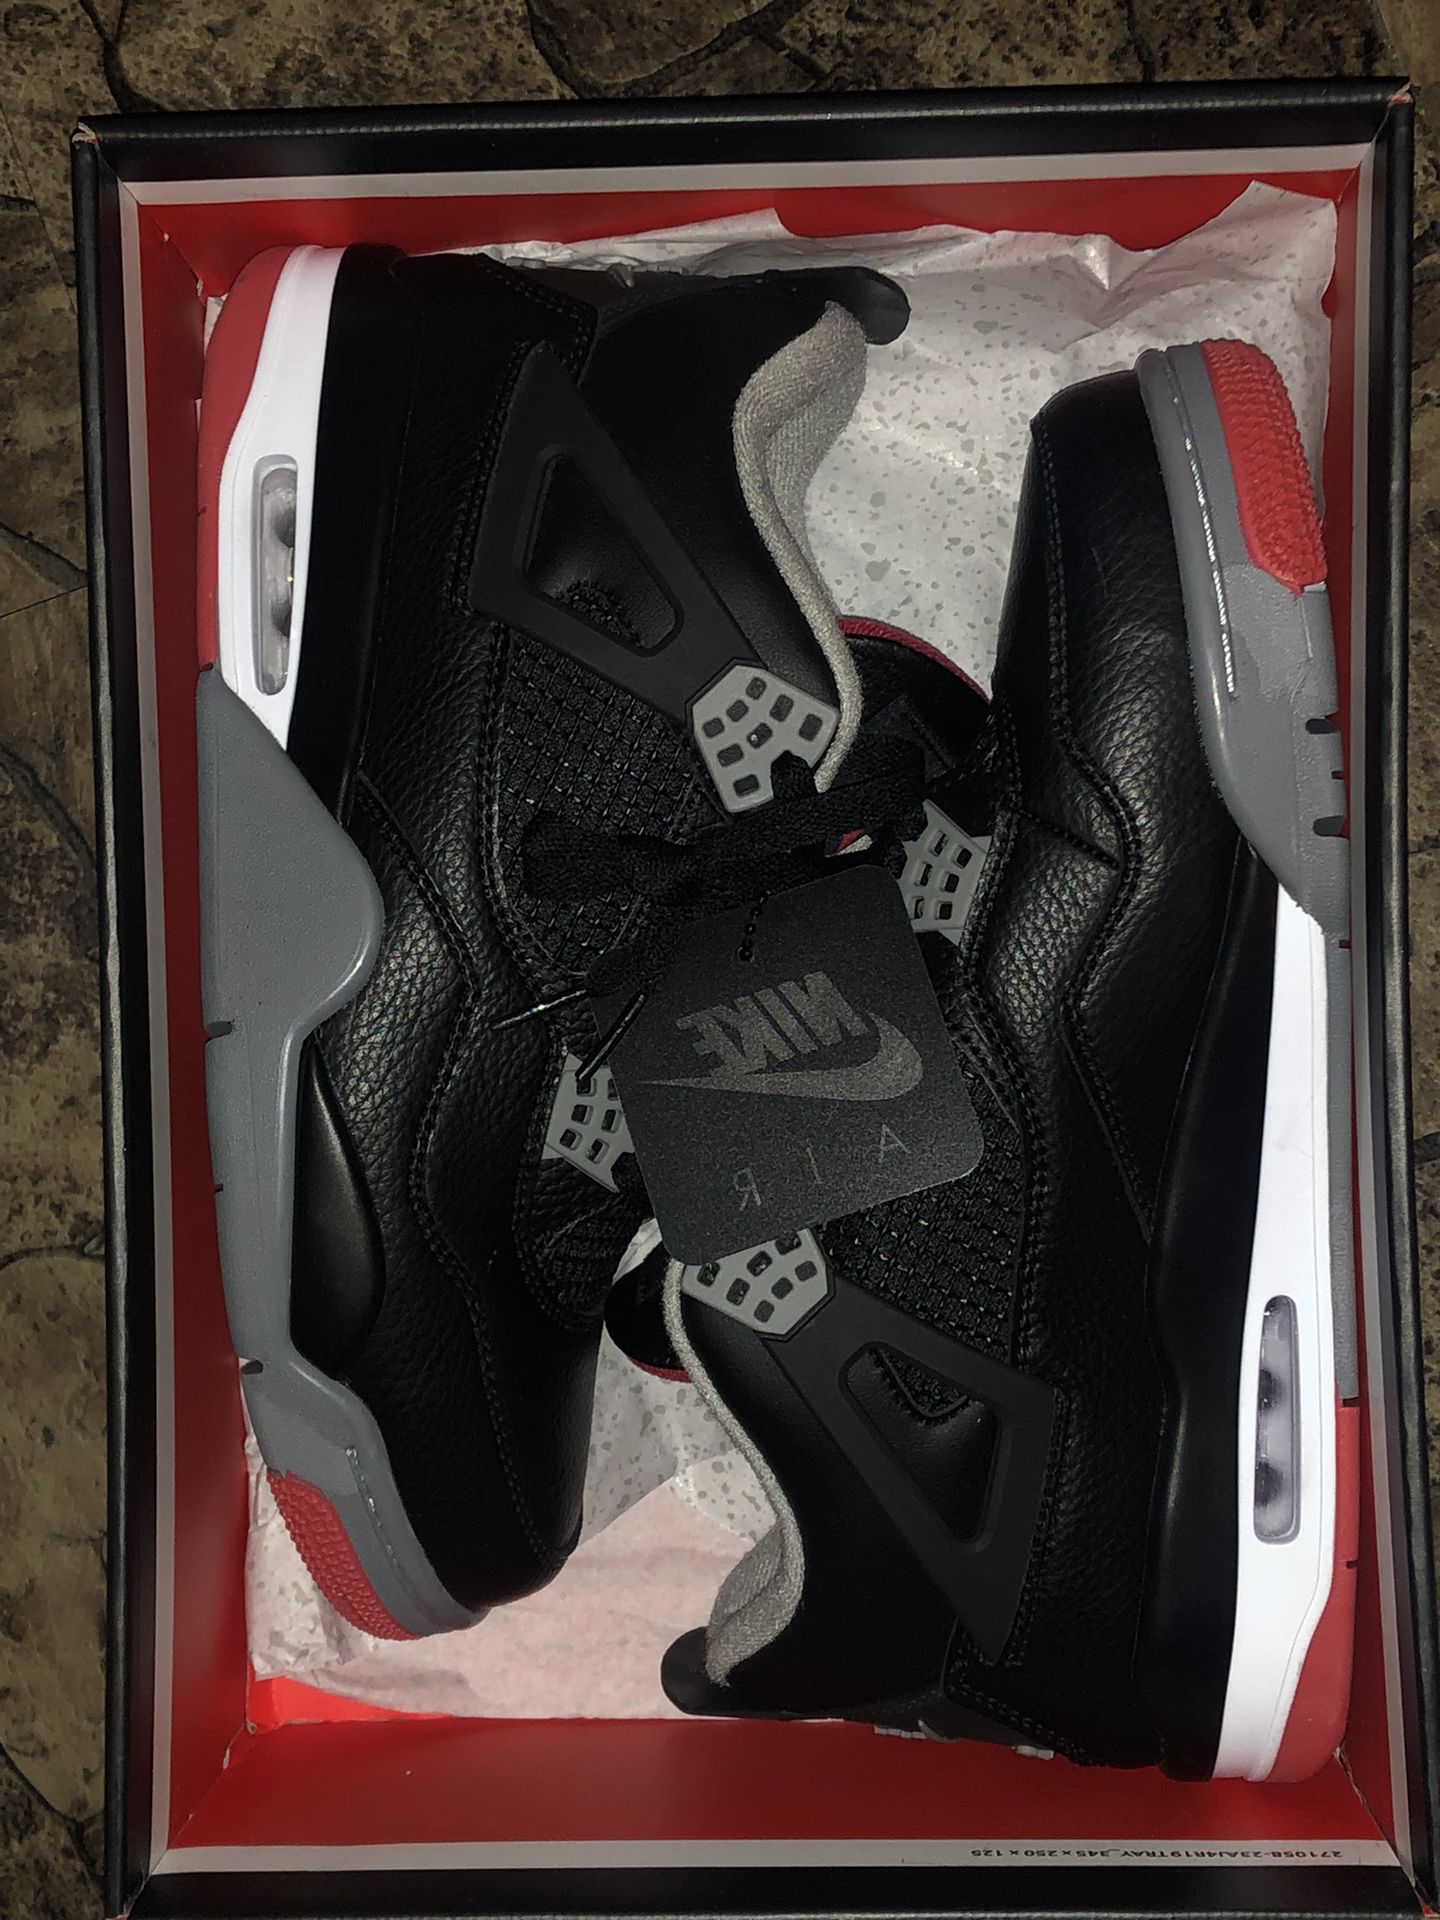 Jordan Bred 4s Size 10 and 11